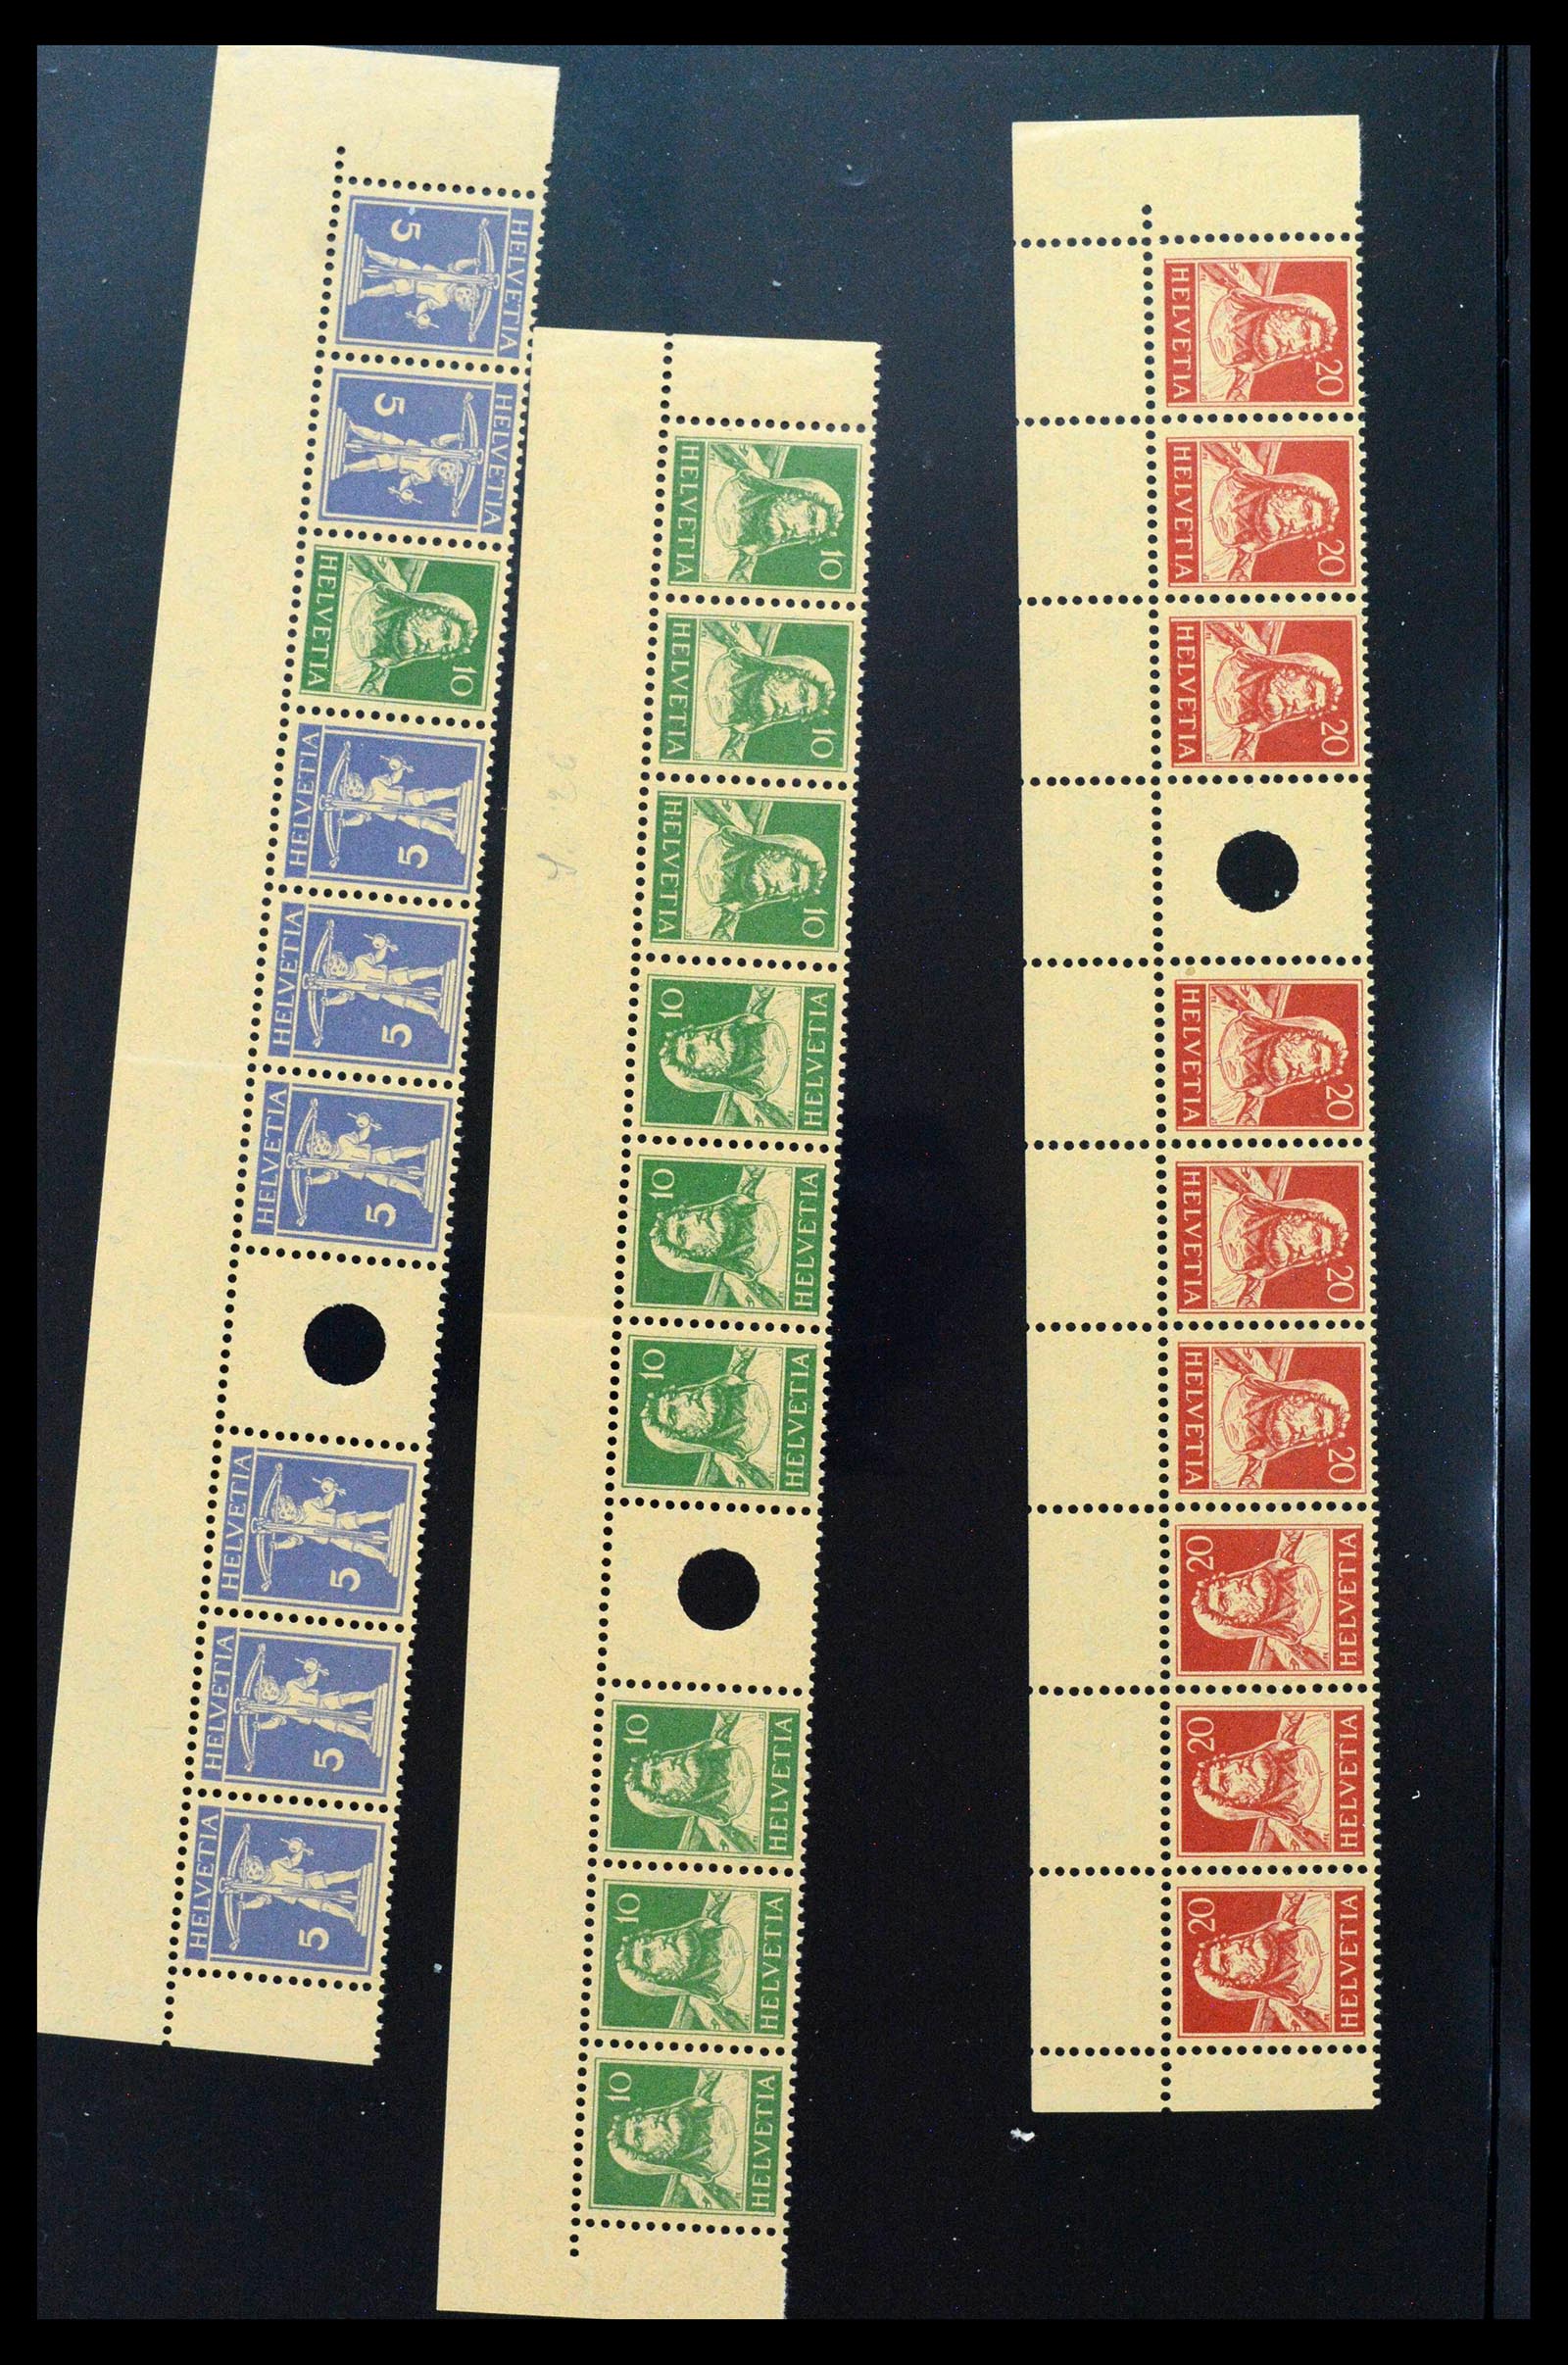 39092 0033 - Stamp collection 39092 Switzerland combinations 1908-2000.